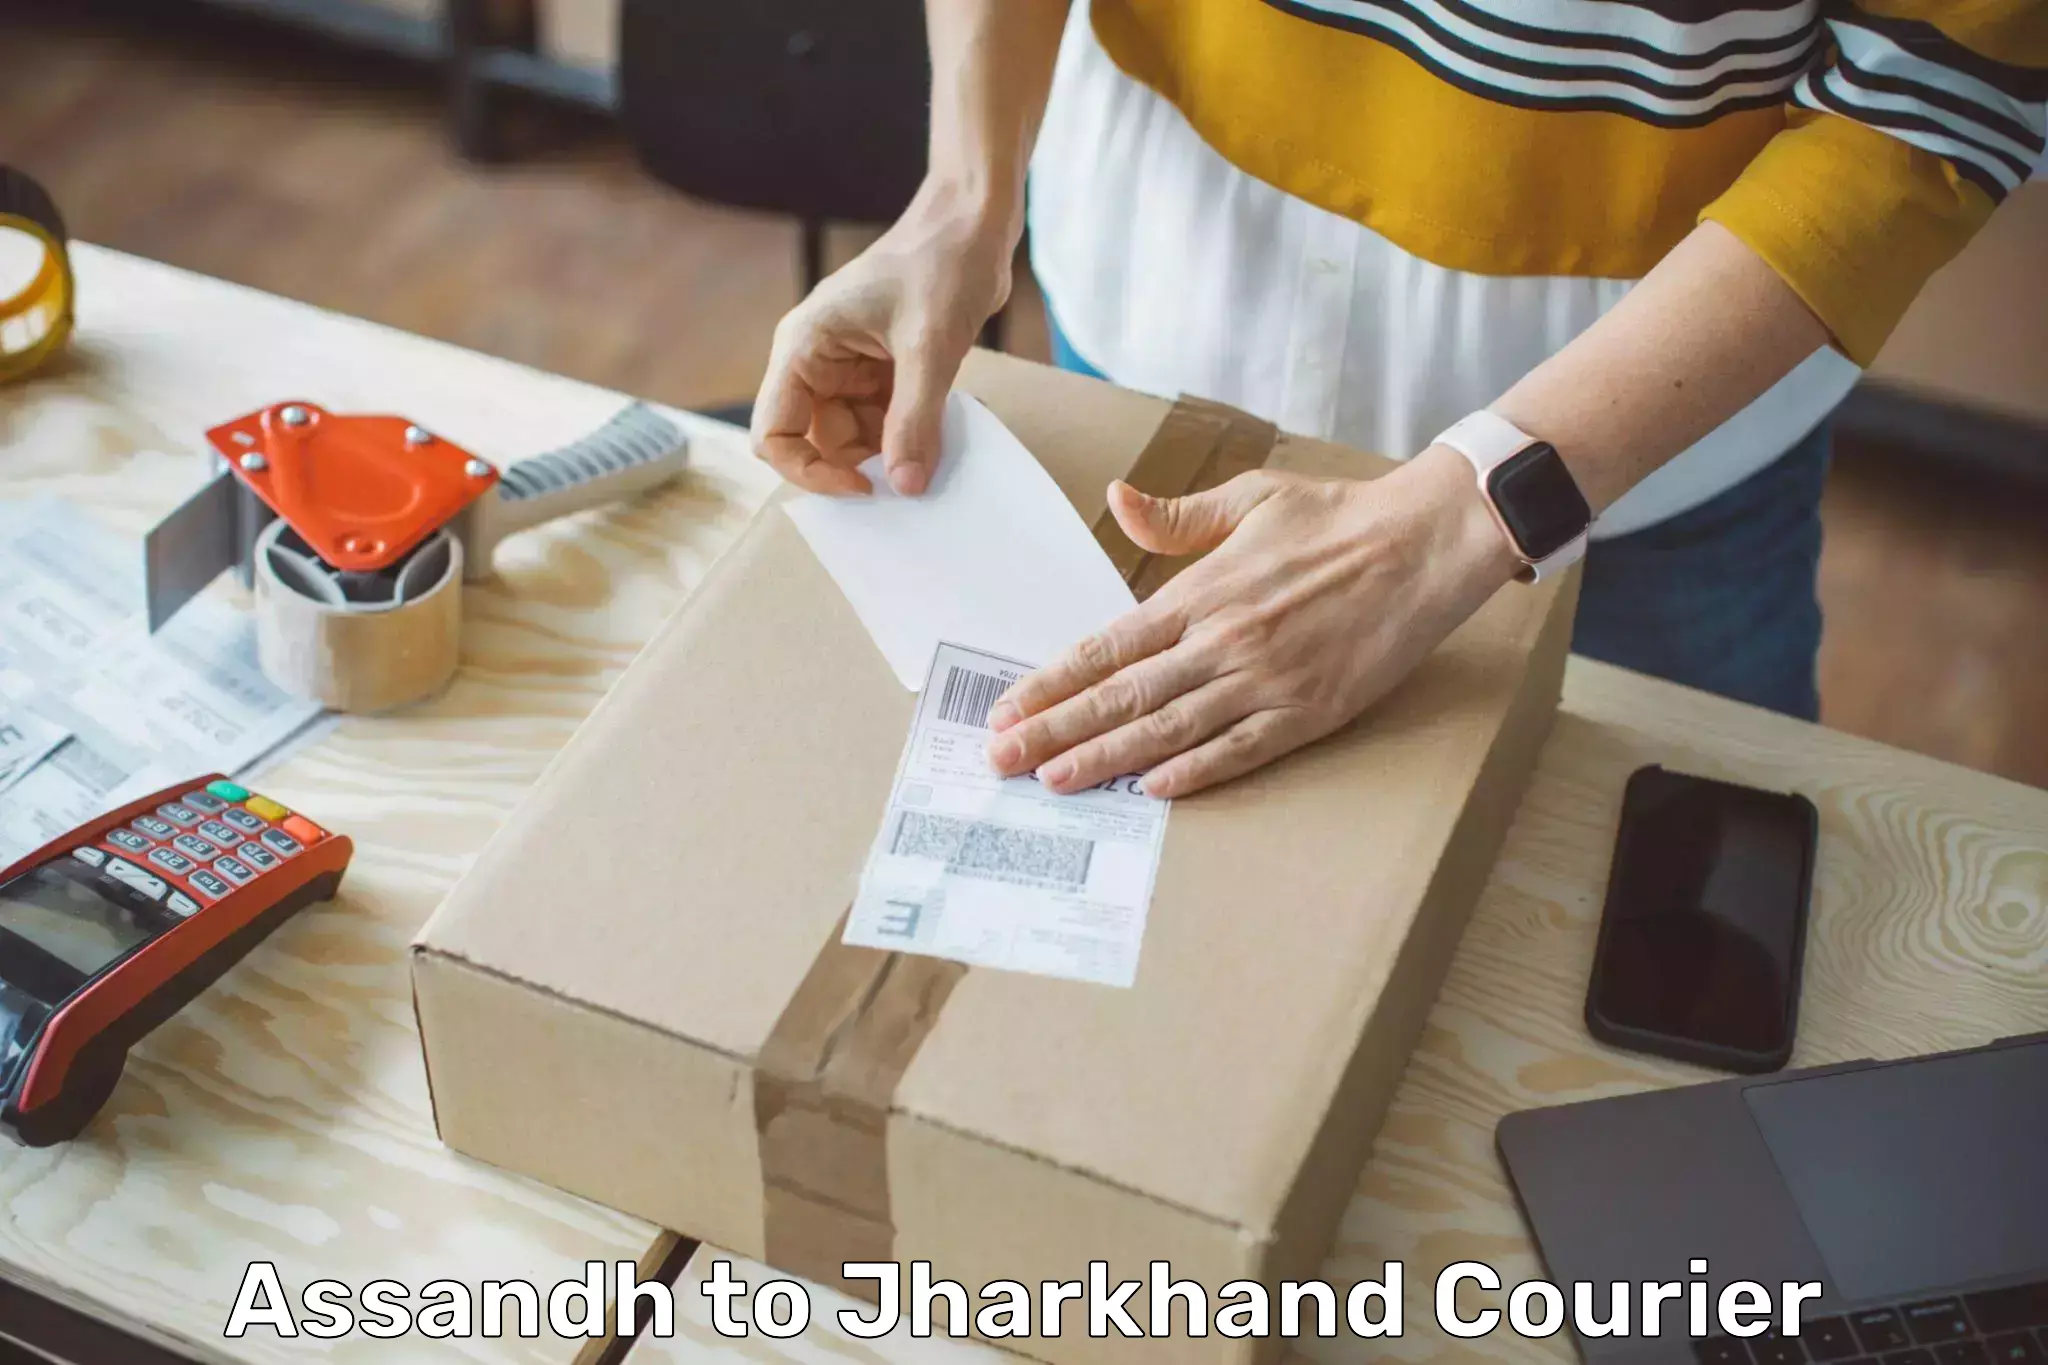 Affordable parcel service Assandh to Jharkhand